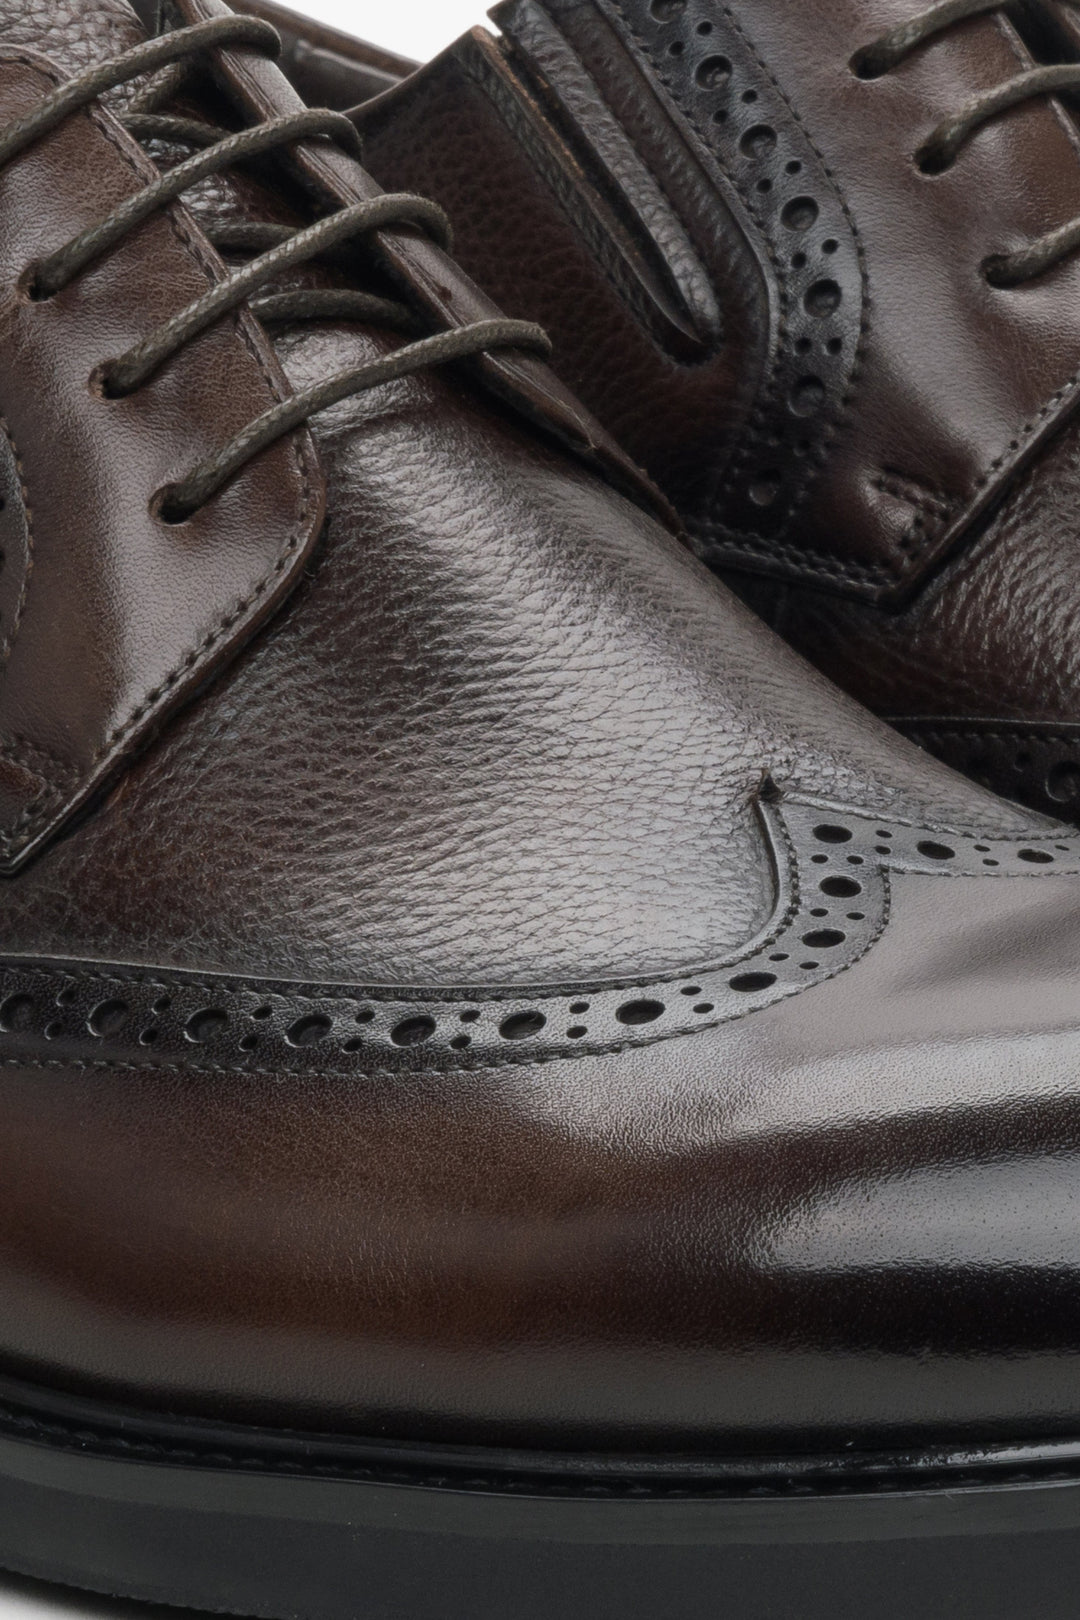 Men's brown lace-up shoes - close-up on the details.